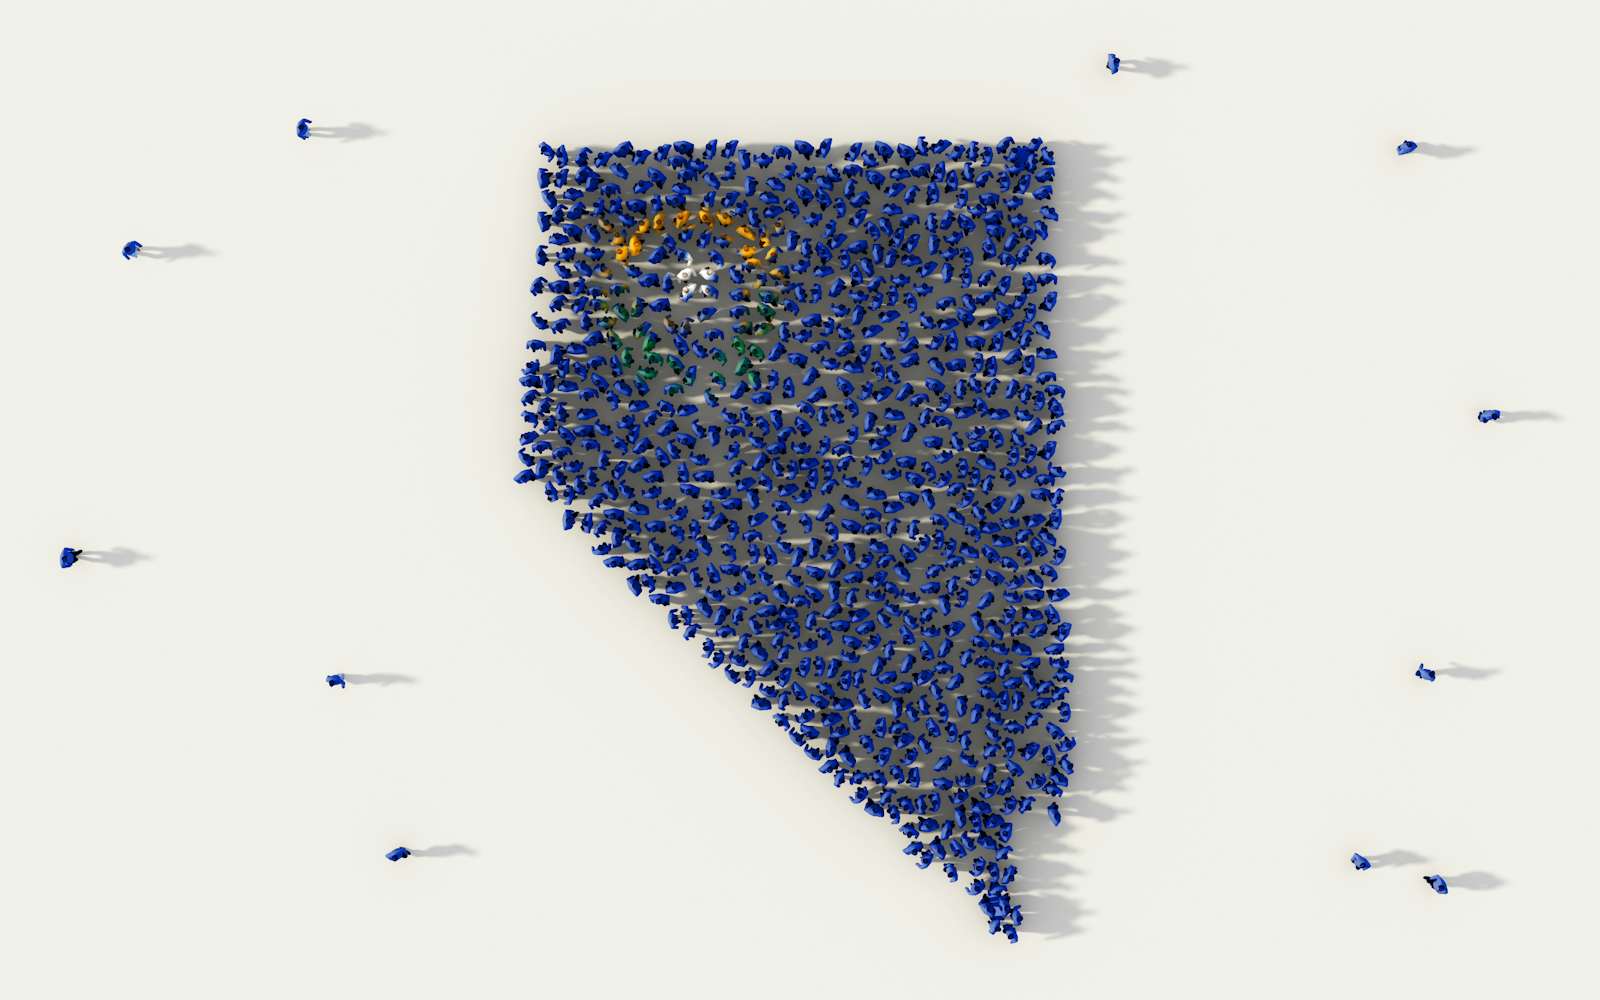 Large group of people forming the shape of Nevada